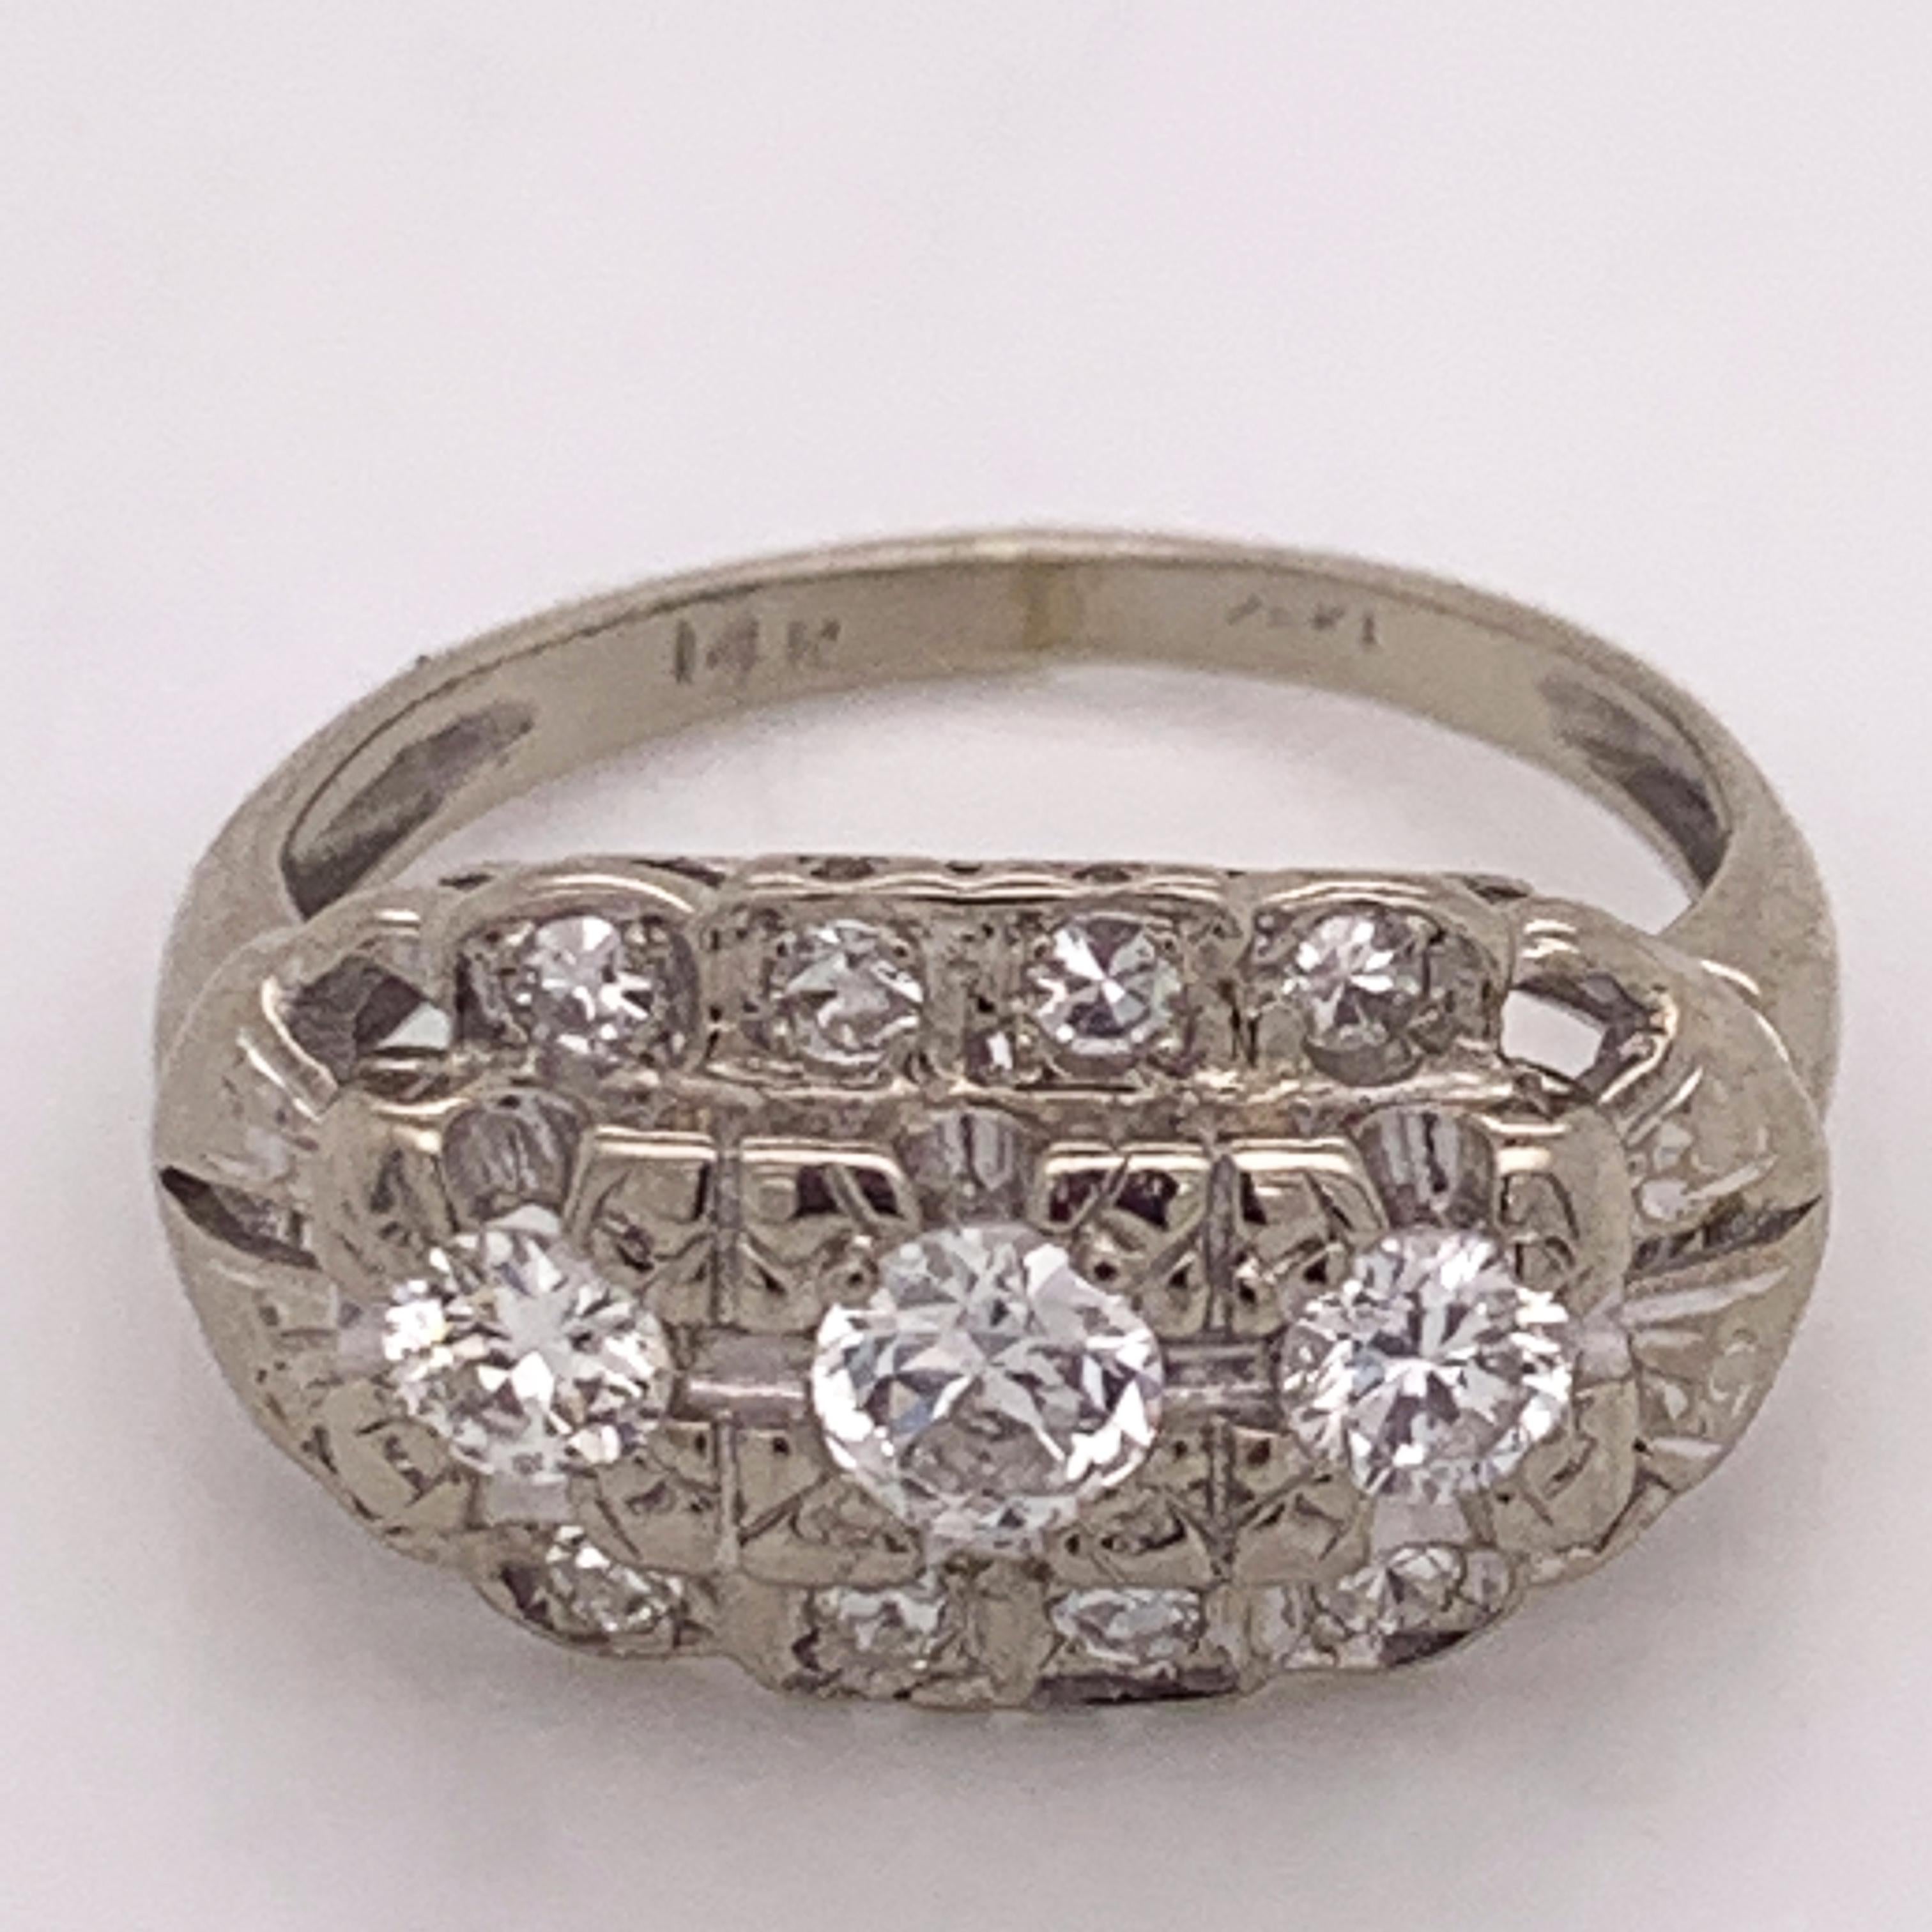 This Art Deco Three-Stone Diamond Engagement Ring set in 14 Karat white gold dates back to the 1920's and has such a beautiful and notable design. Round brilliant cut diamonds were first marketed in 1919 and are what sets this stunning ring apart